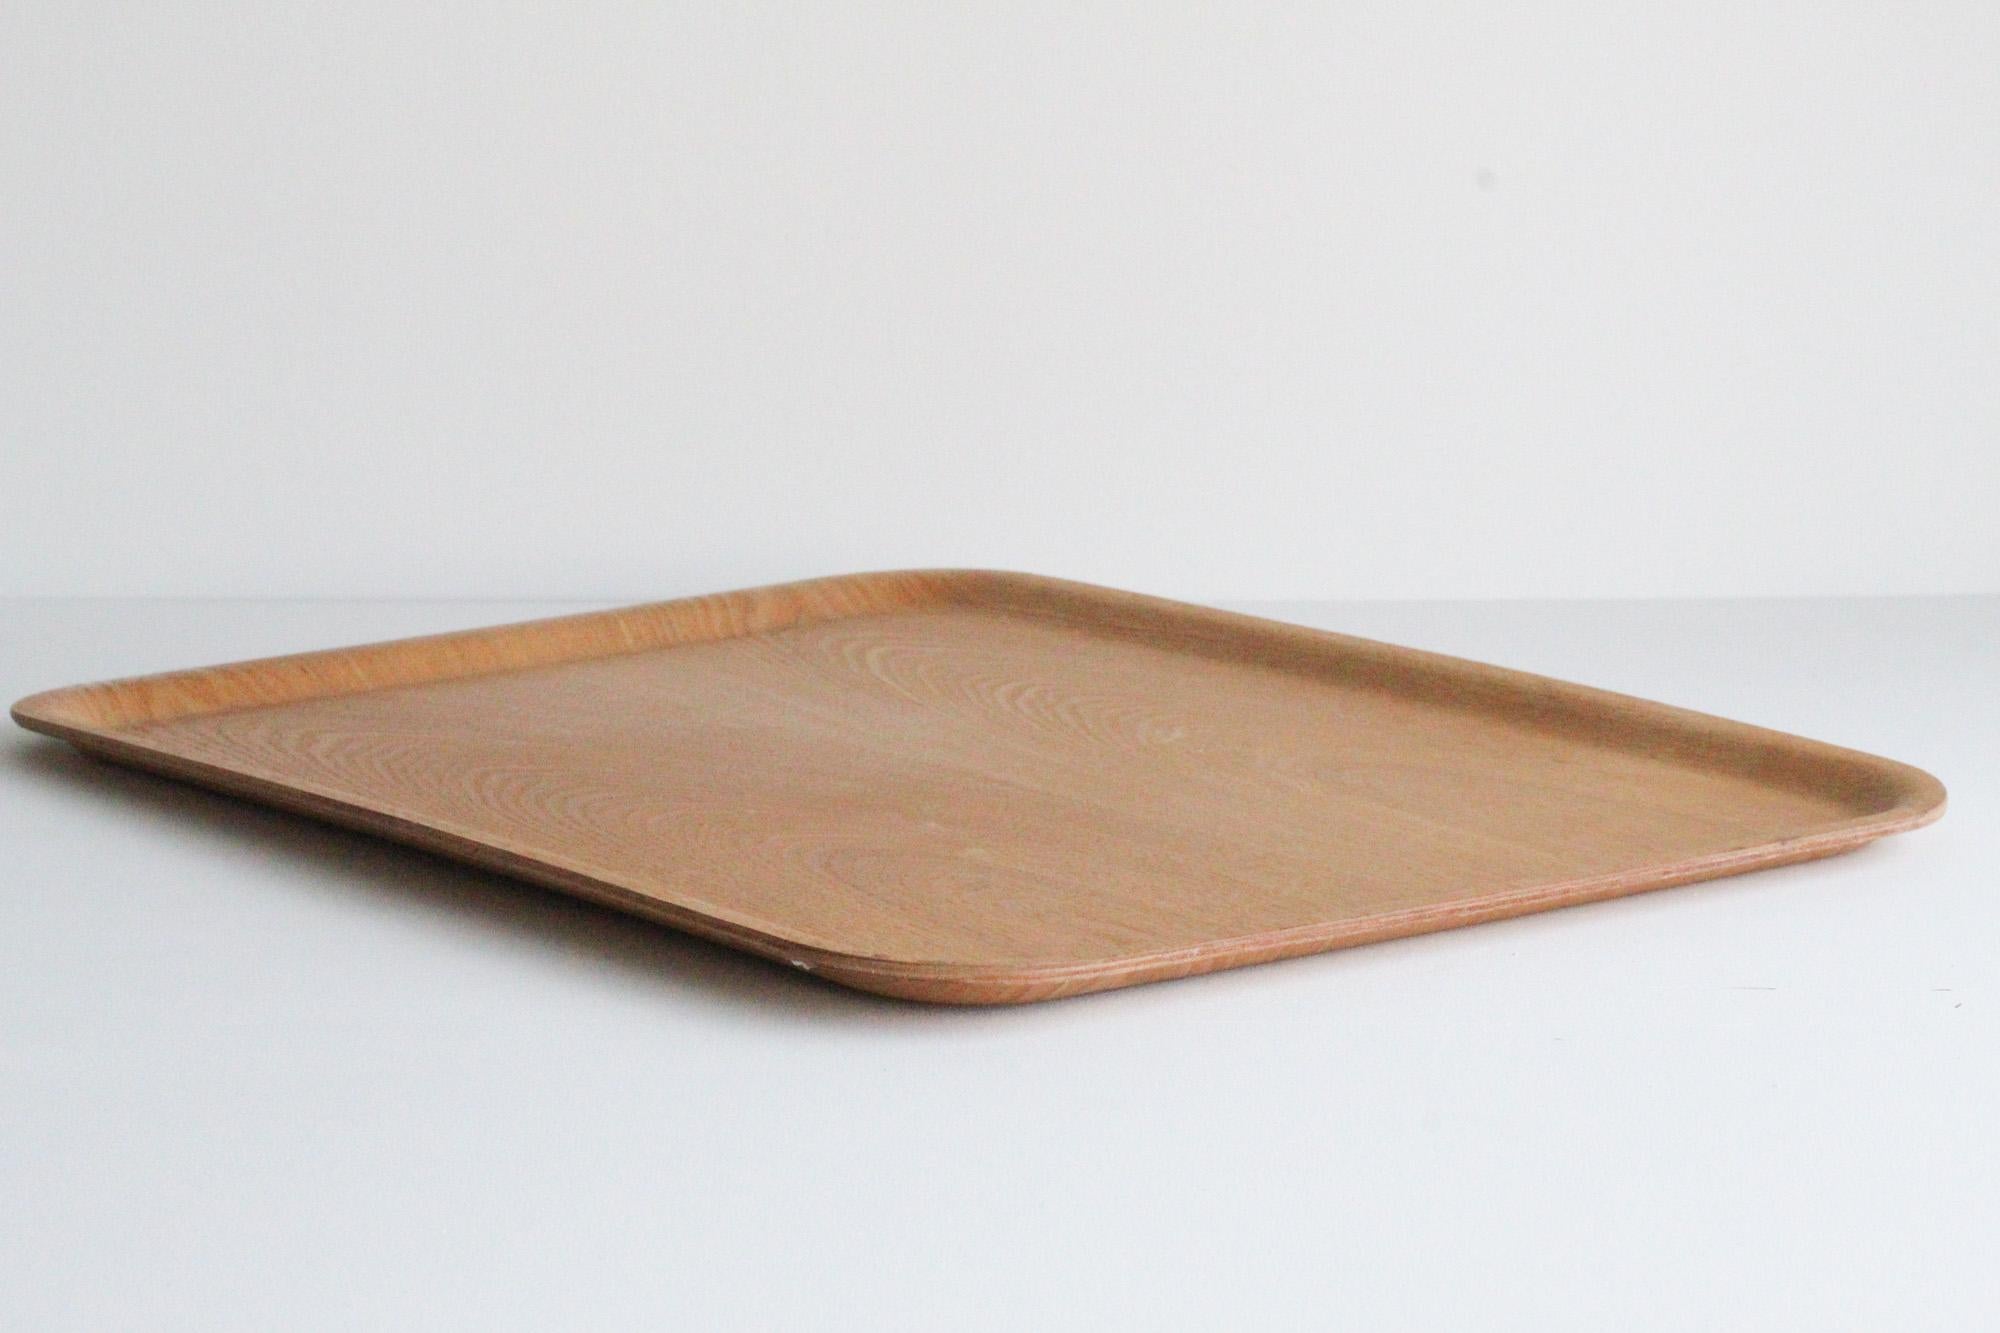 Uncommon Danish Dansk light wood tray which either bleached teak or natural ash with stunning wood grain. Tray doesn't have Dansk marking on the underside but came in its original box at one point. 


Excellent design that would work well with